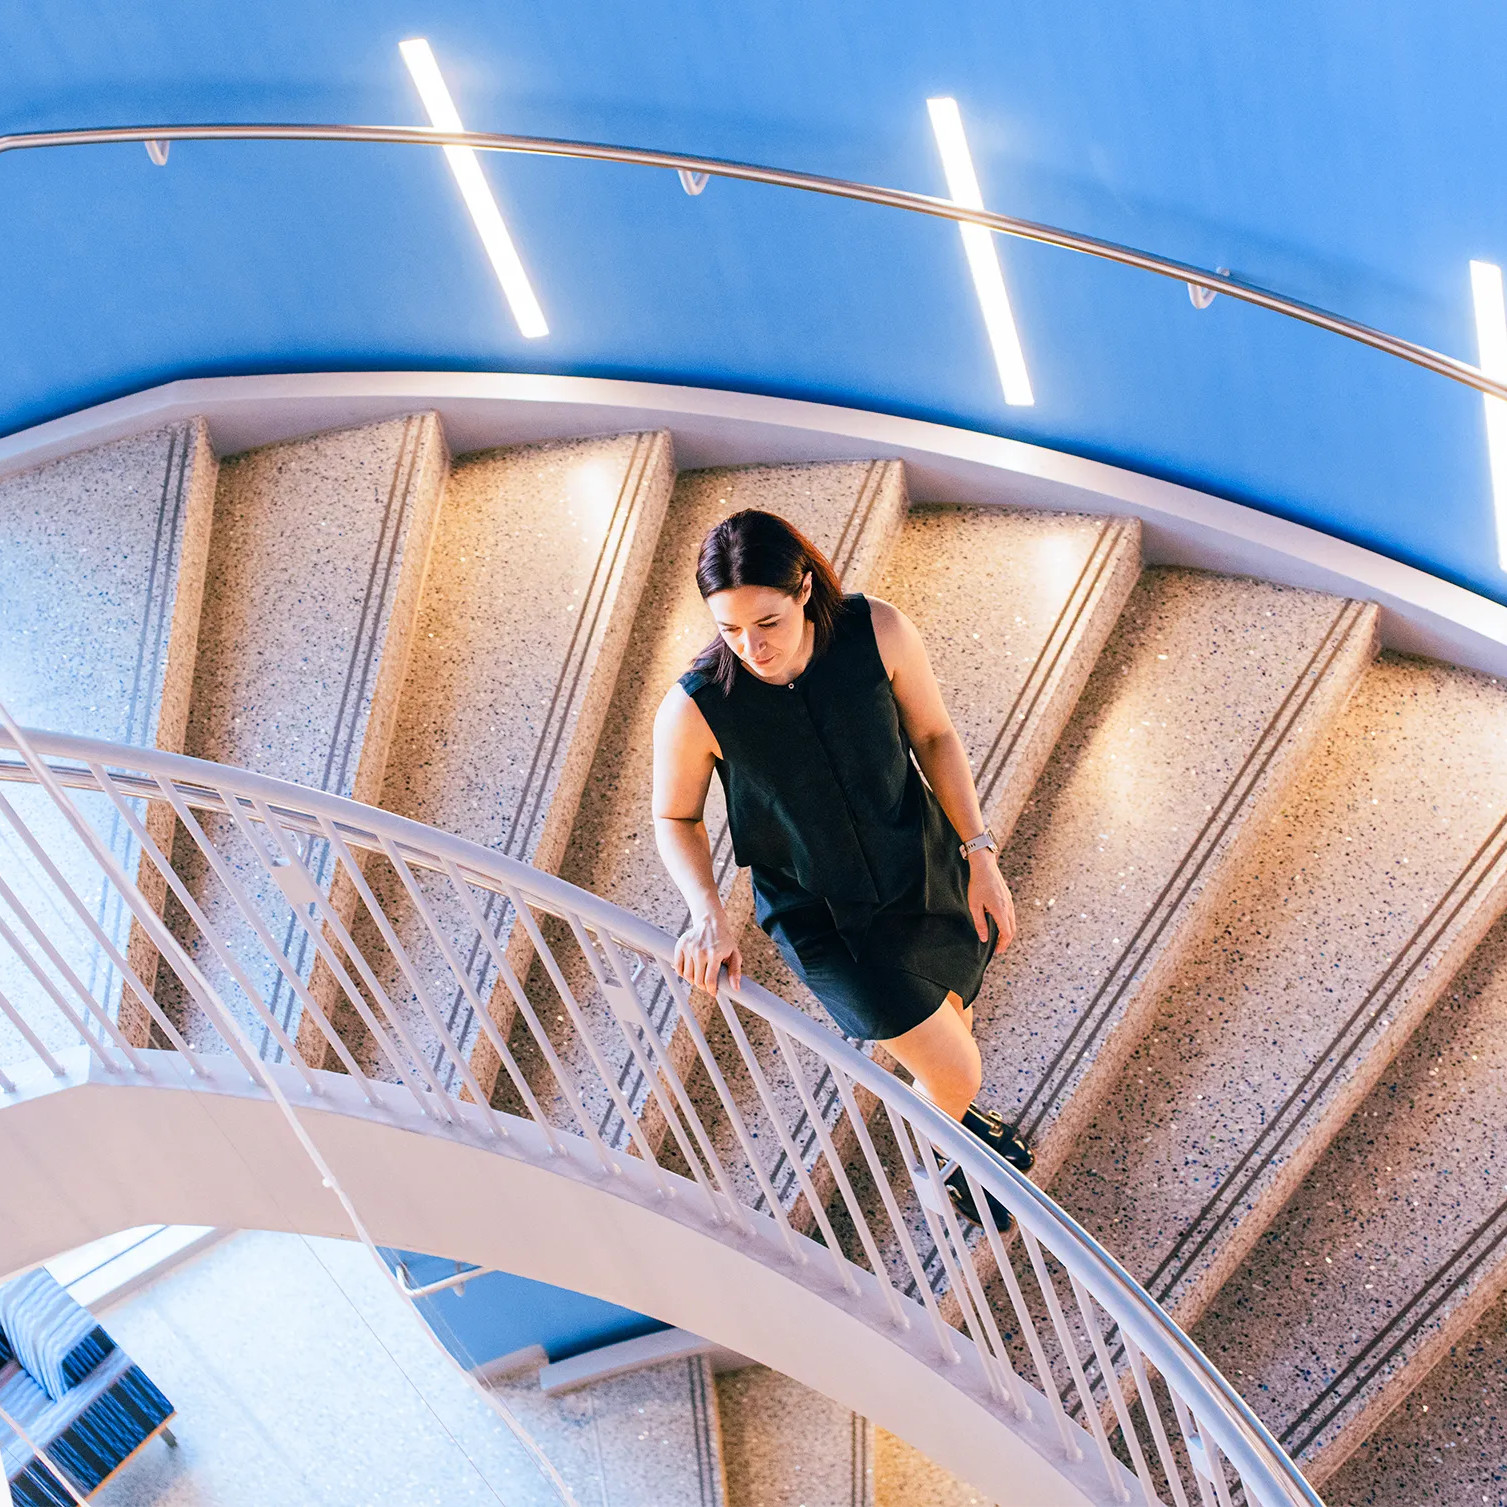 Shot of Erin Calipari in the Engineering and Science Building sprial staircase taken from above.